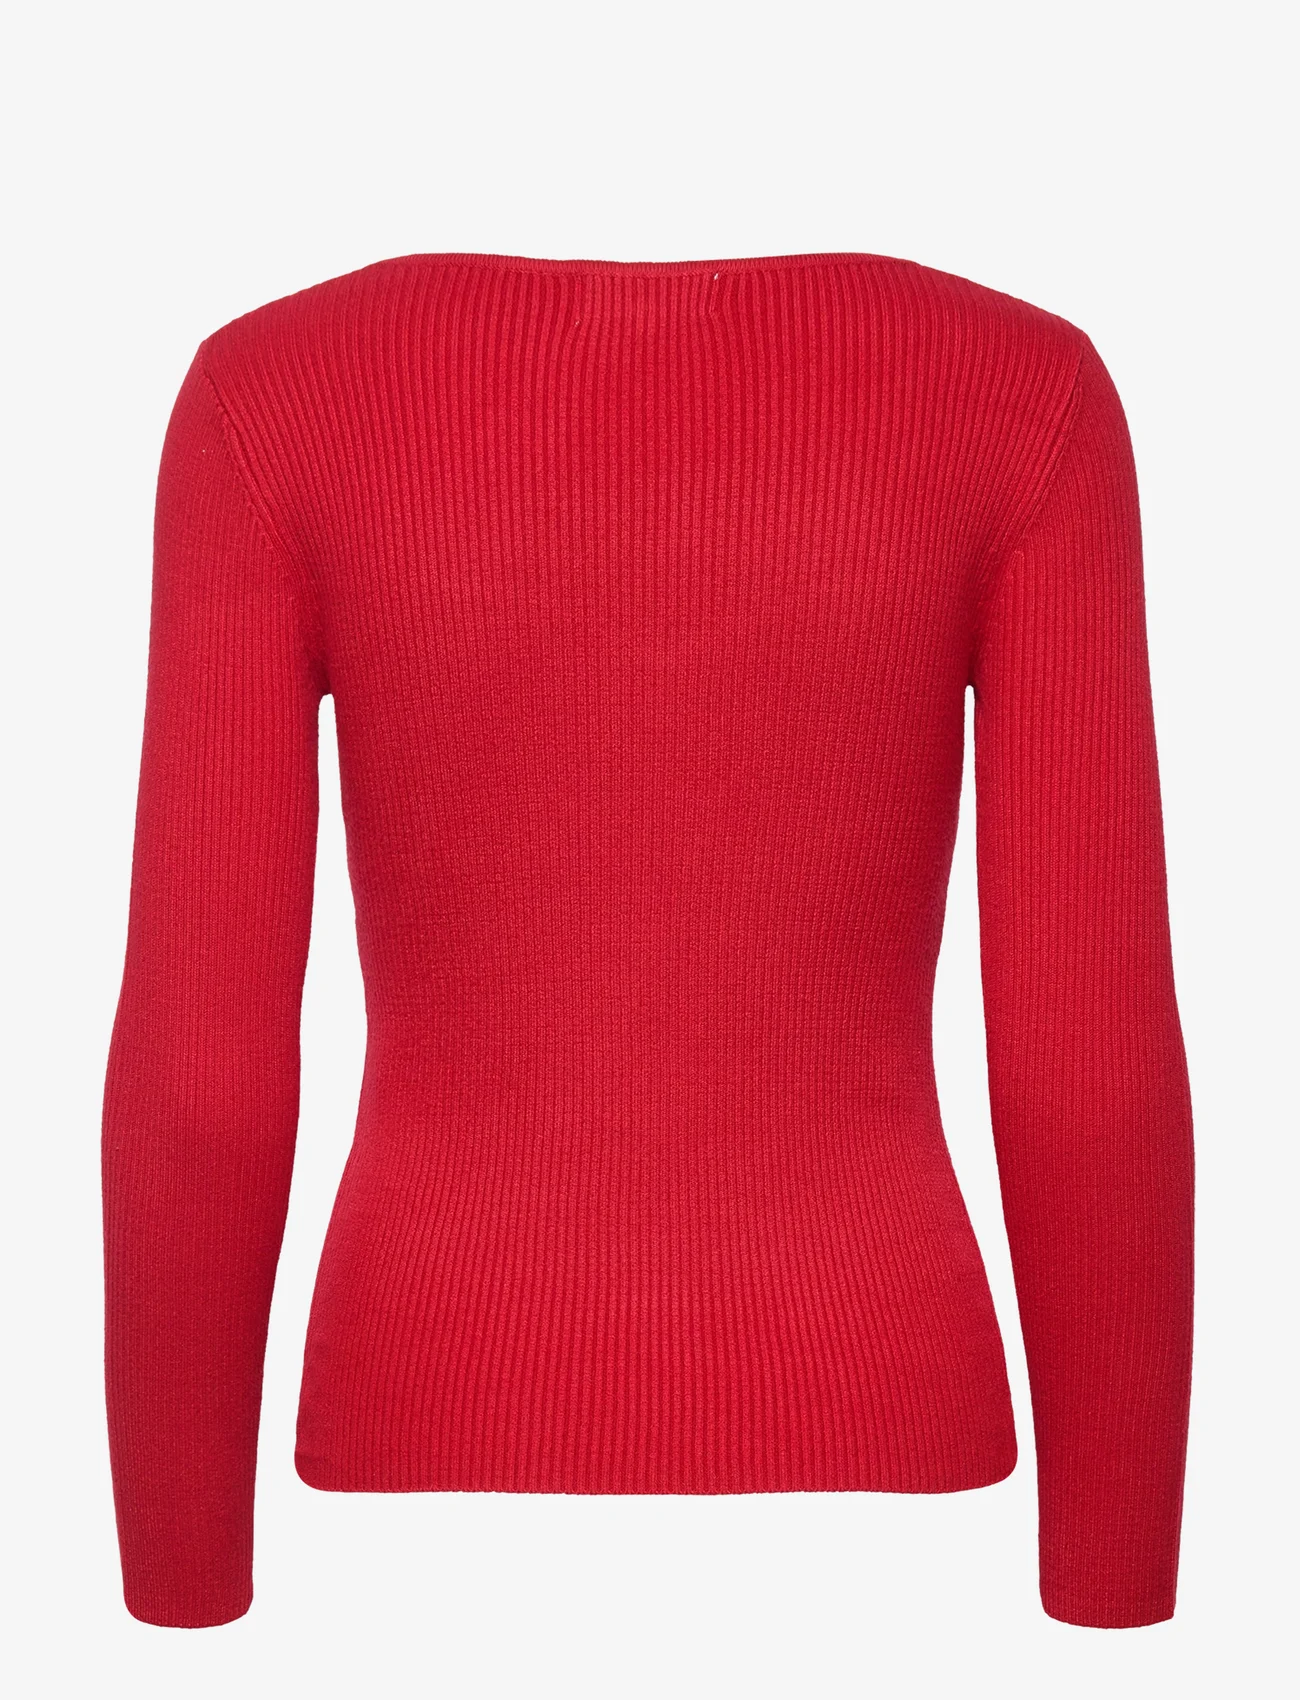 Malina - Tulip ribbed knitted top - džemperiai - berry red - 1